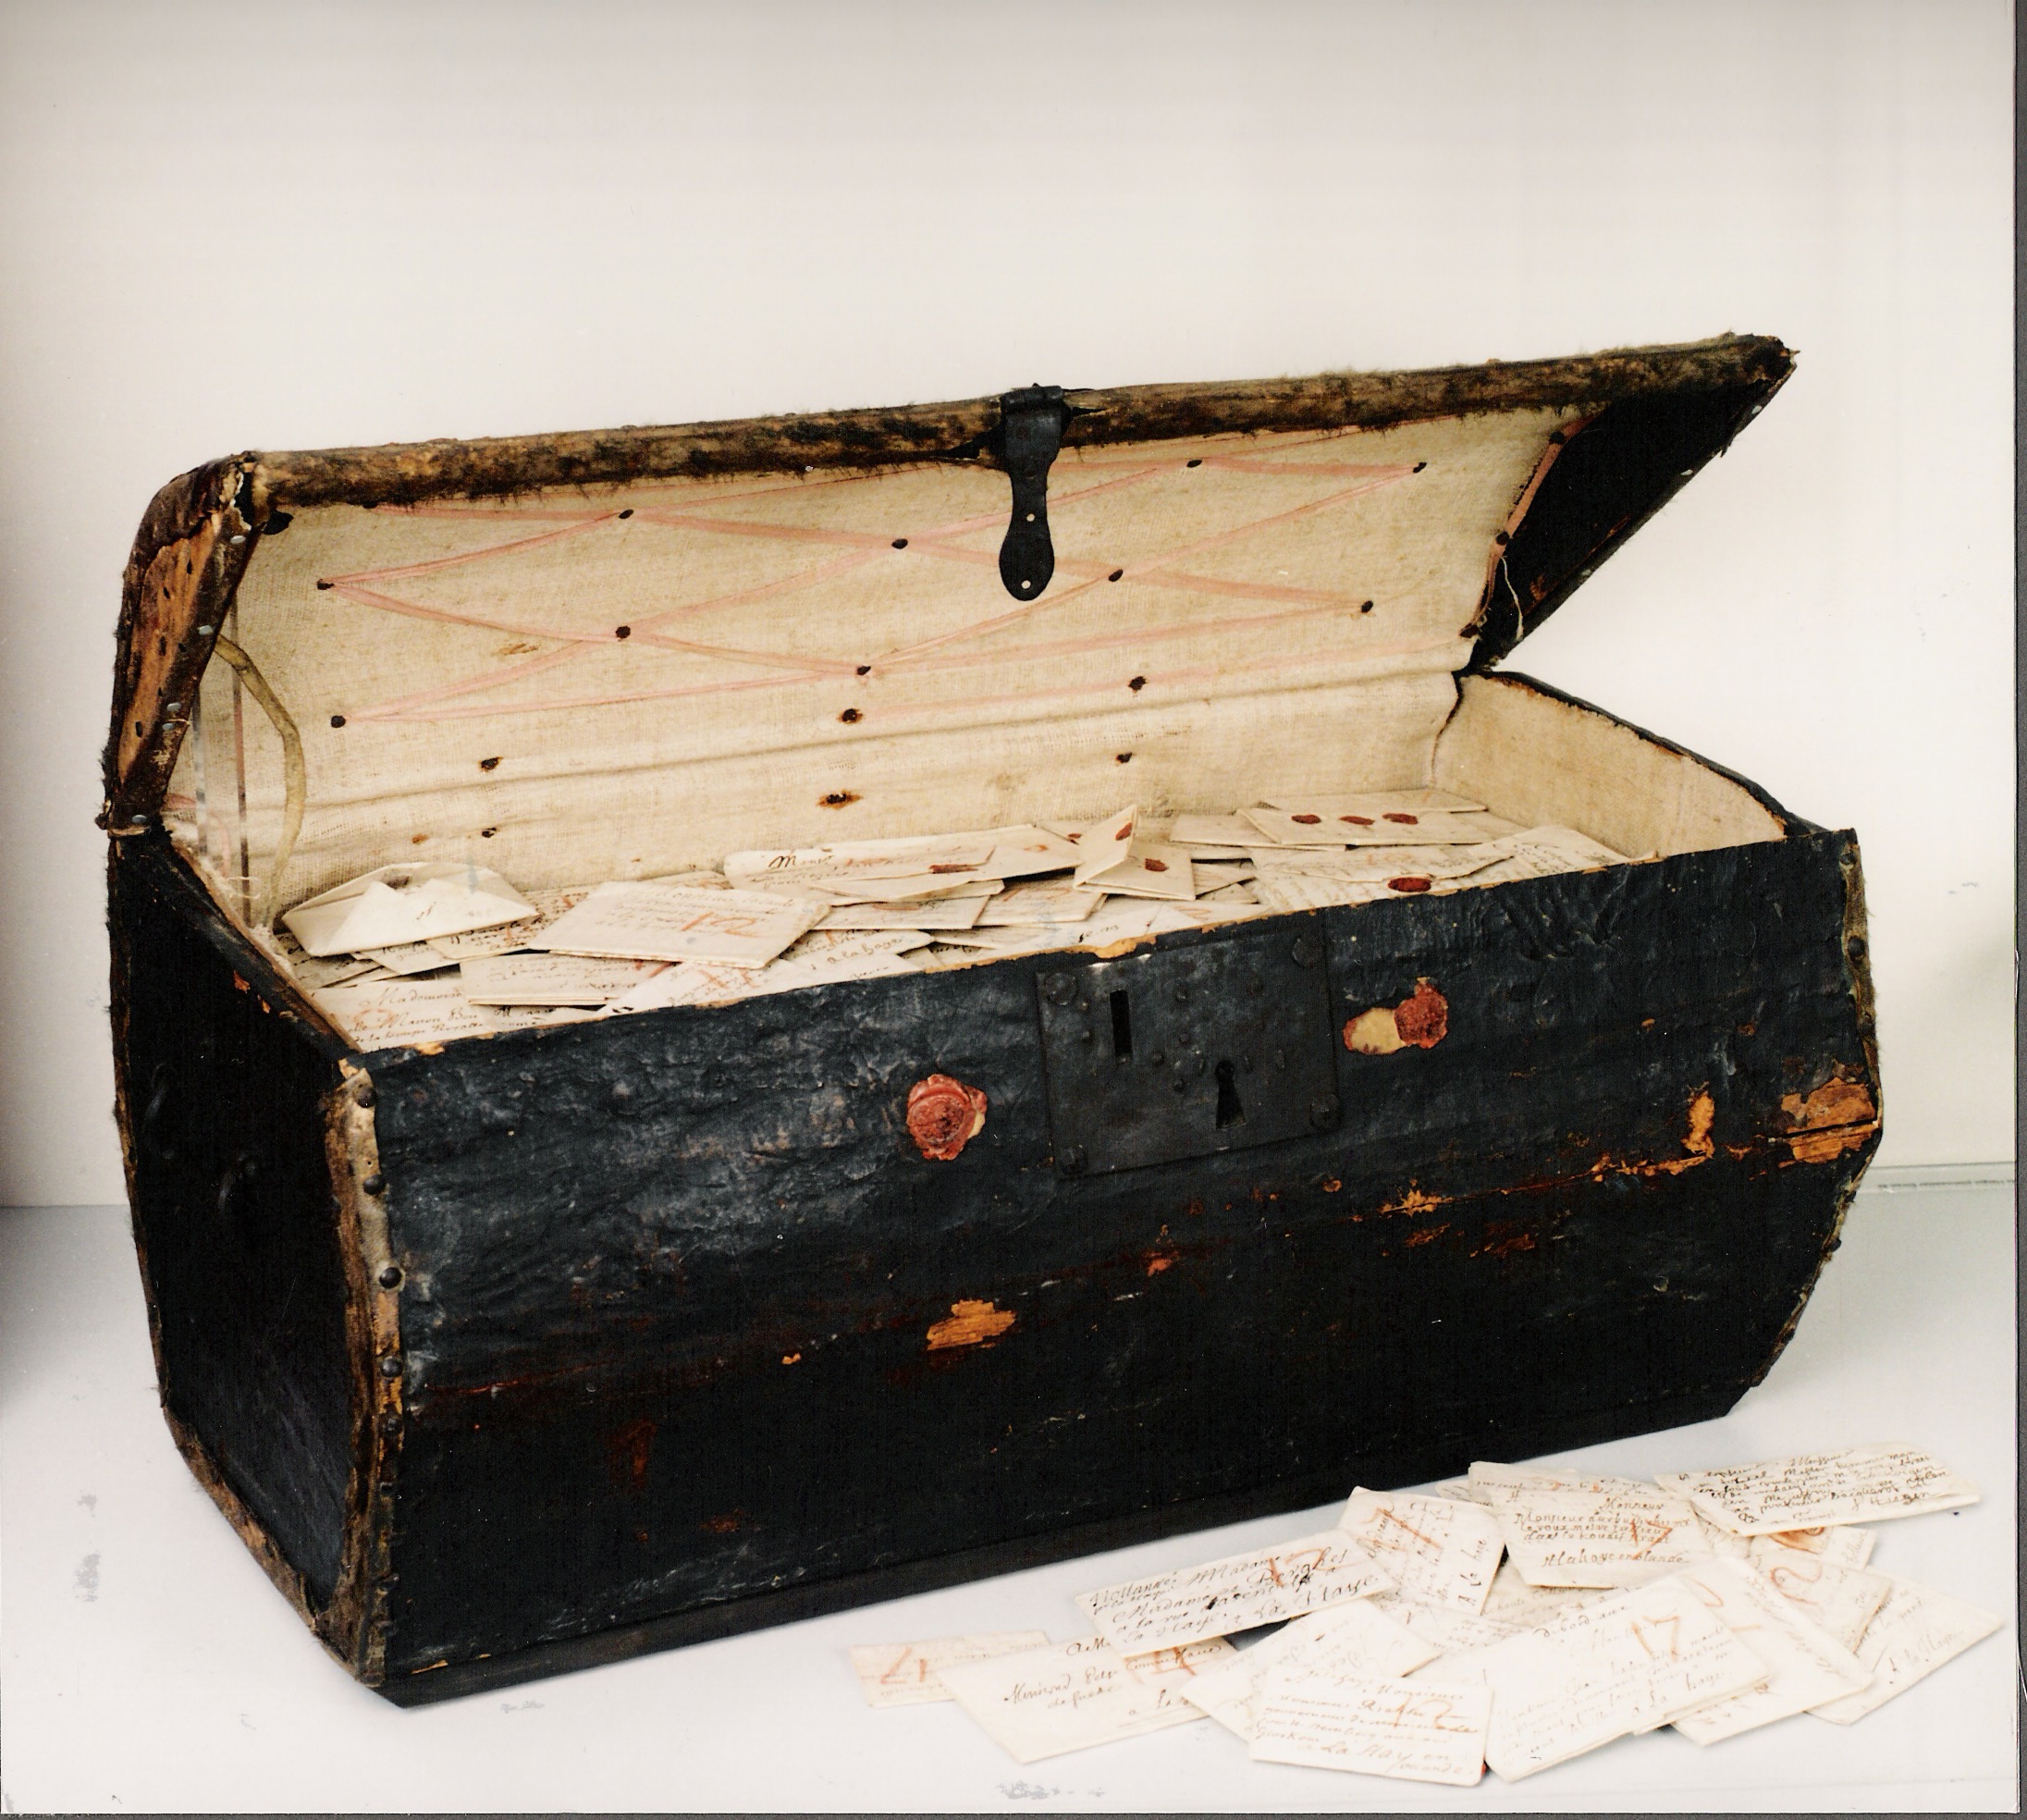 The Renaissance chest contains missives from around the world sent to The Hague. (Photo: Courtesy of the Unlocking History Research Group archive.)